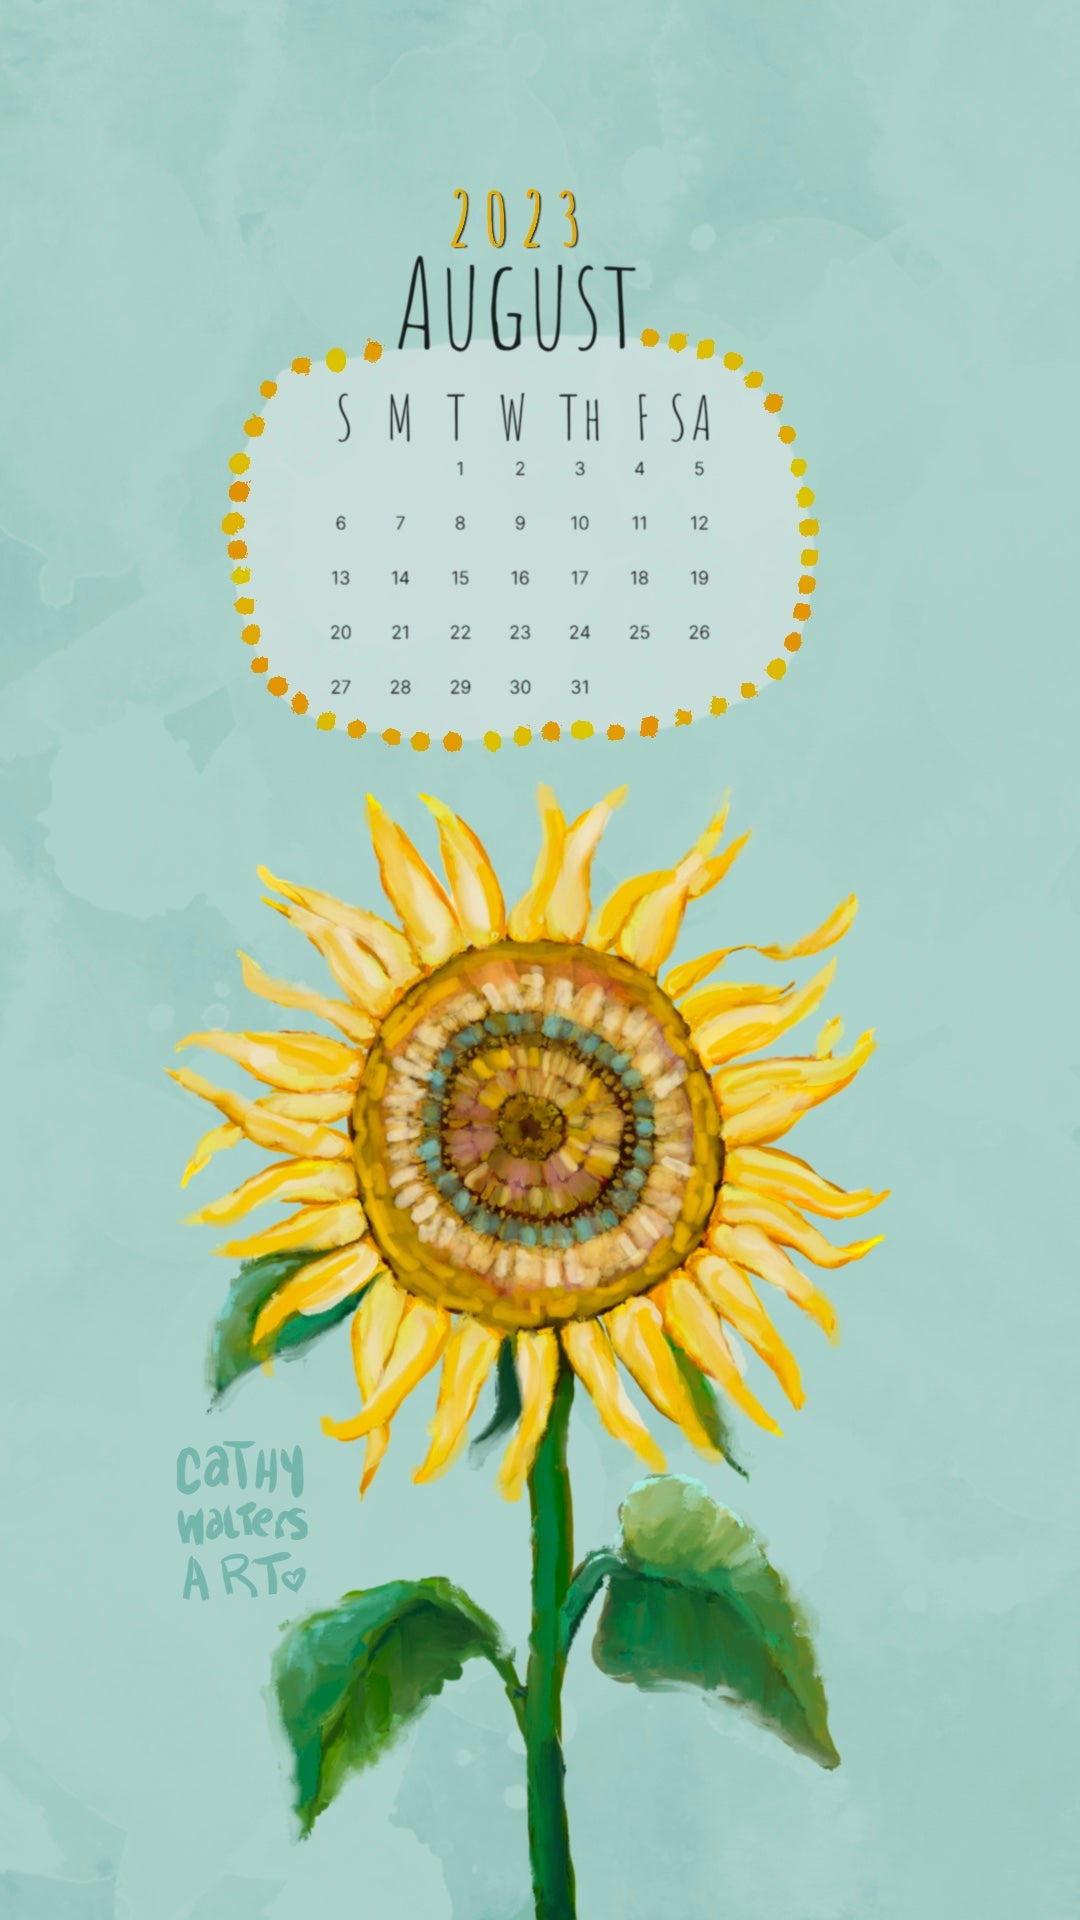 Bring some sunshine to your phone with this month's free wallpaper!